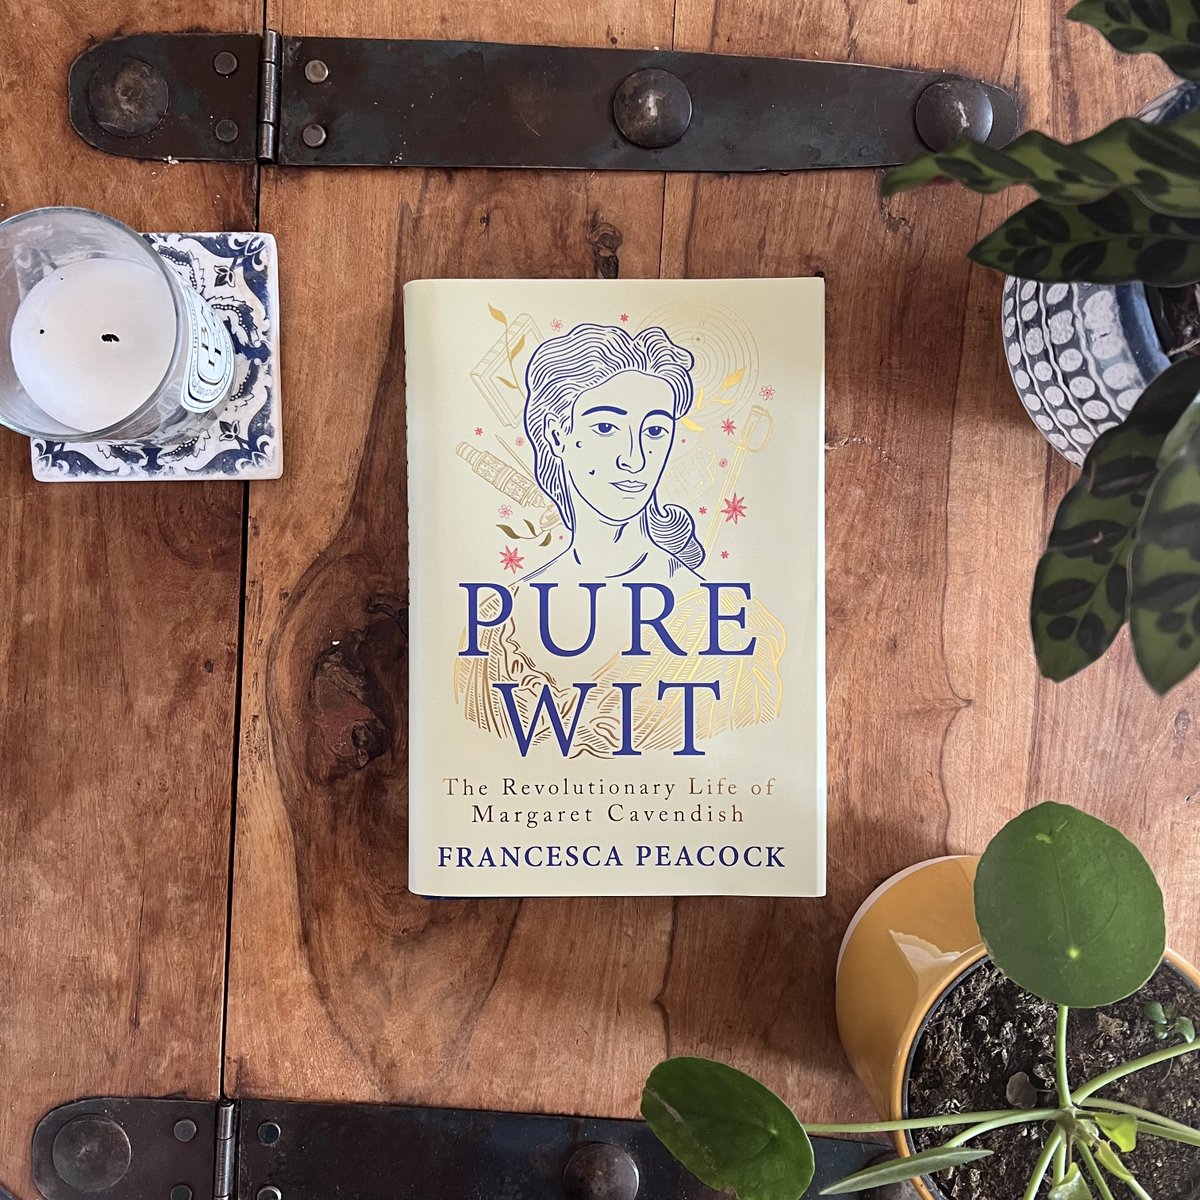 @kileyreid @say_shannon @SJMaas @josephinequinn @jesmimi @WendyPMitchell Pure Wit – @cesca_peacock From our friends at @HoZ_Books, a biography of the remarkable, and in her time scandalous, seventeenth-century genius Margaret Cavendish, Duchess of Newcastle.